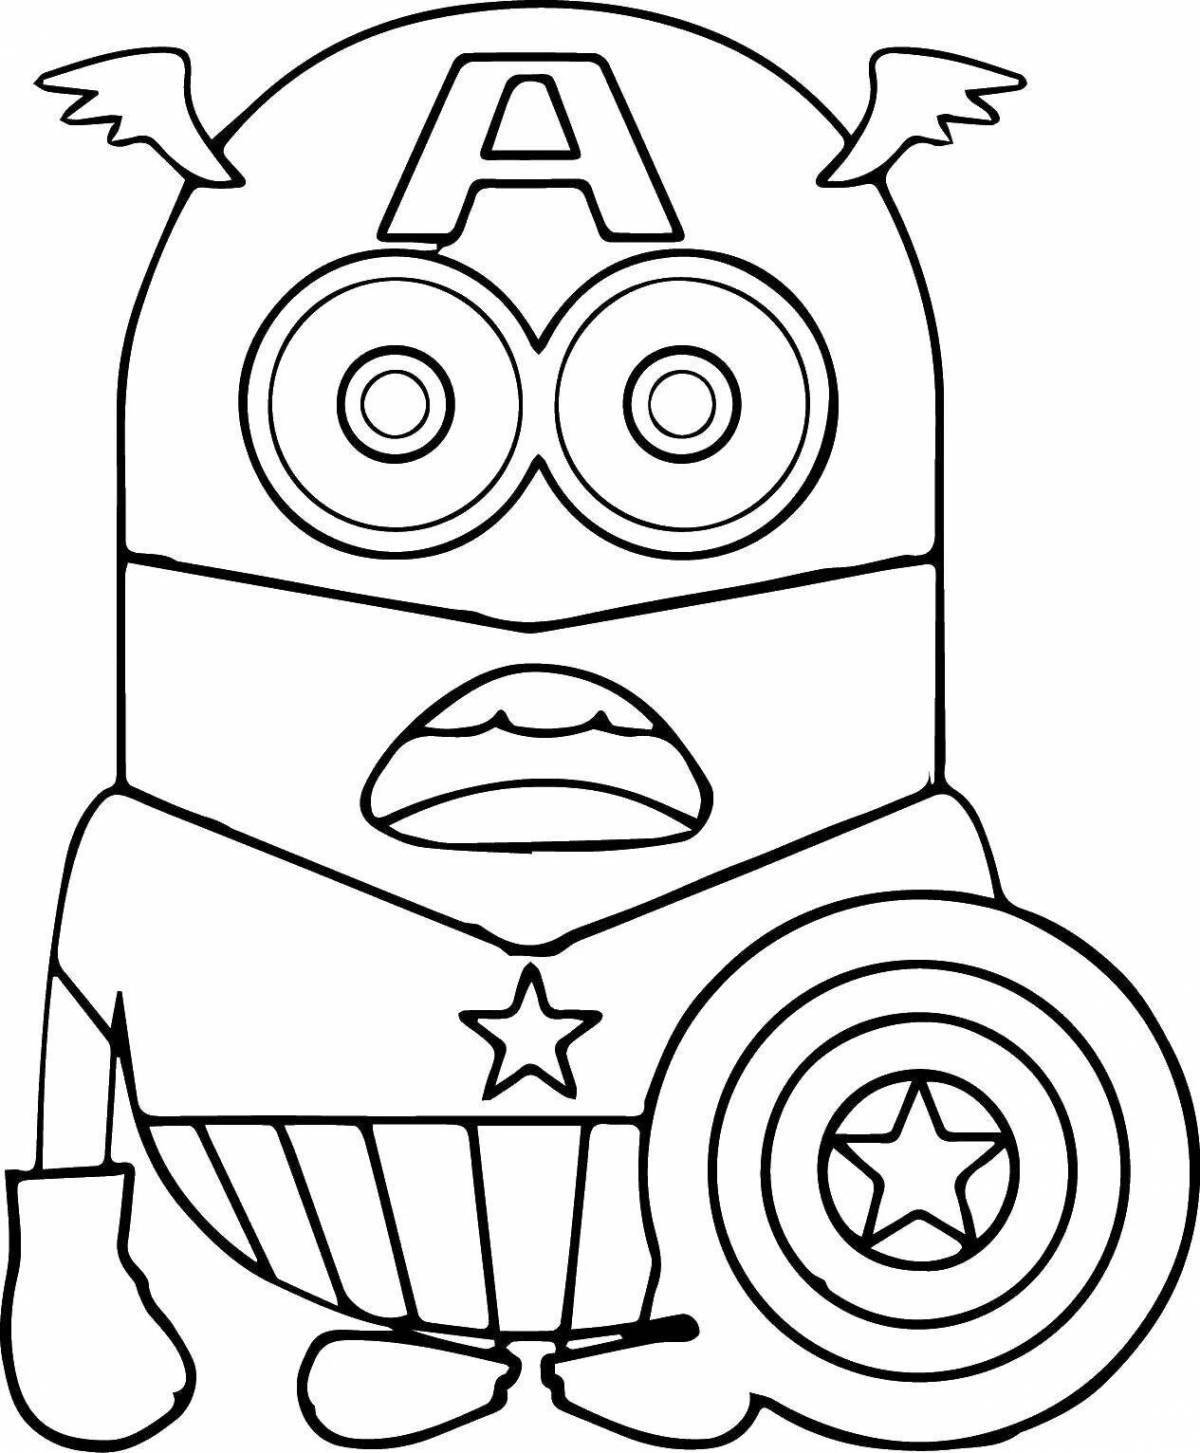 The craziest coloring book for boys